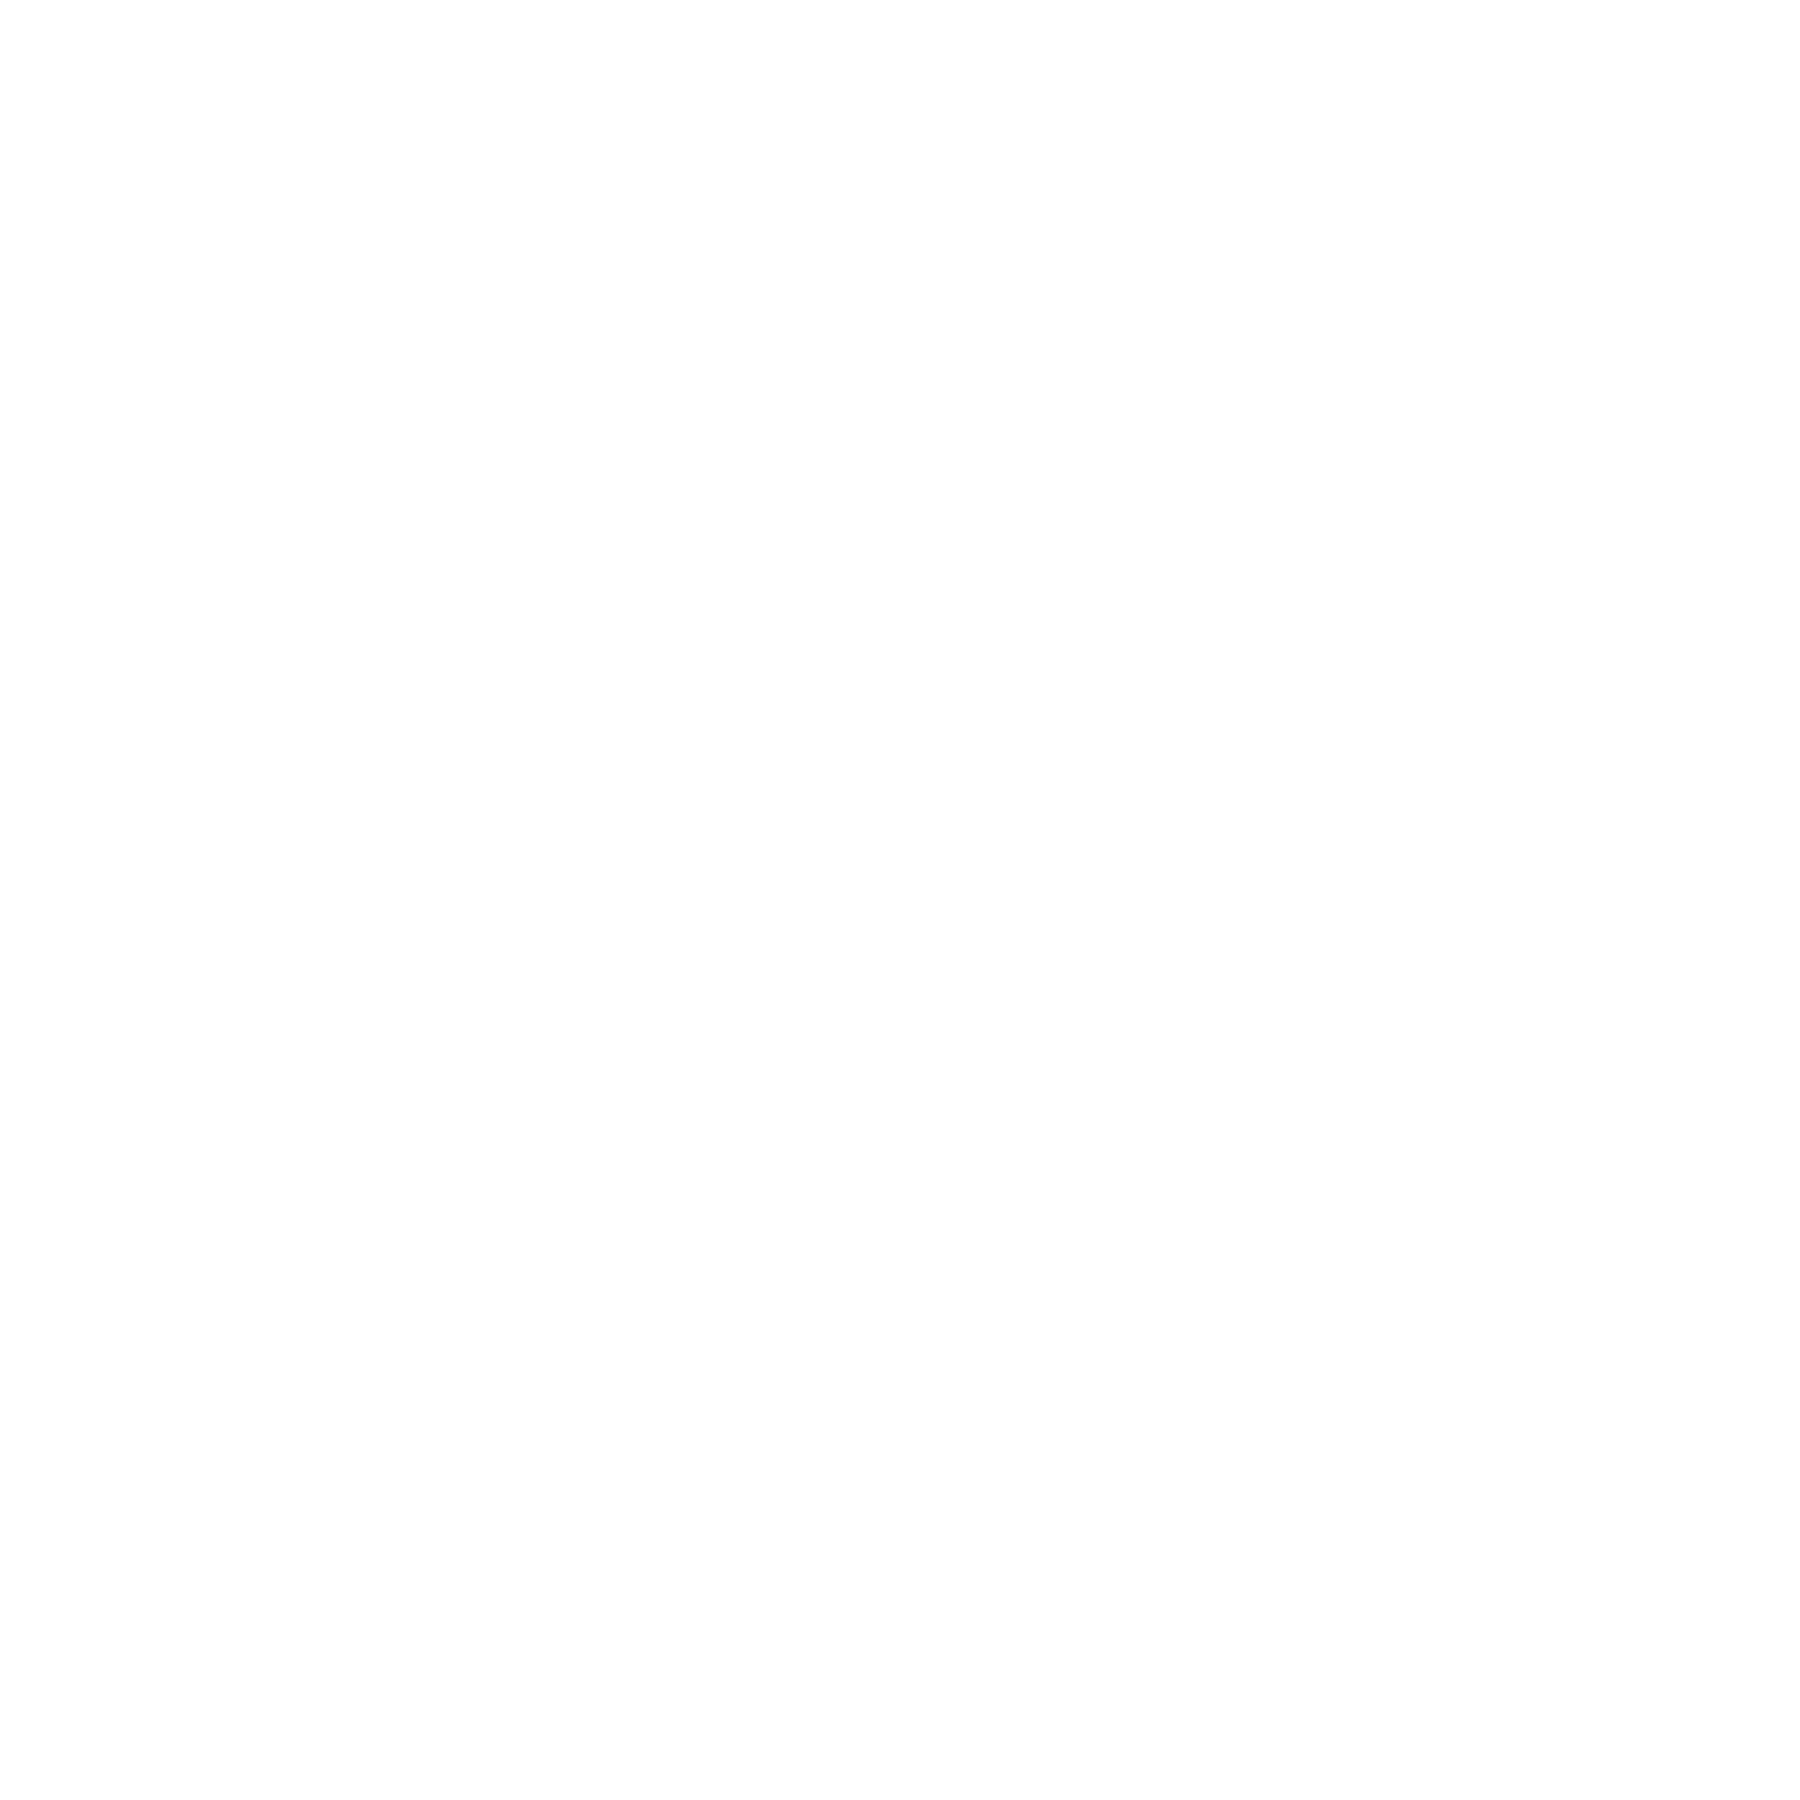 Unlimited traval